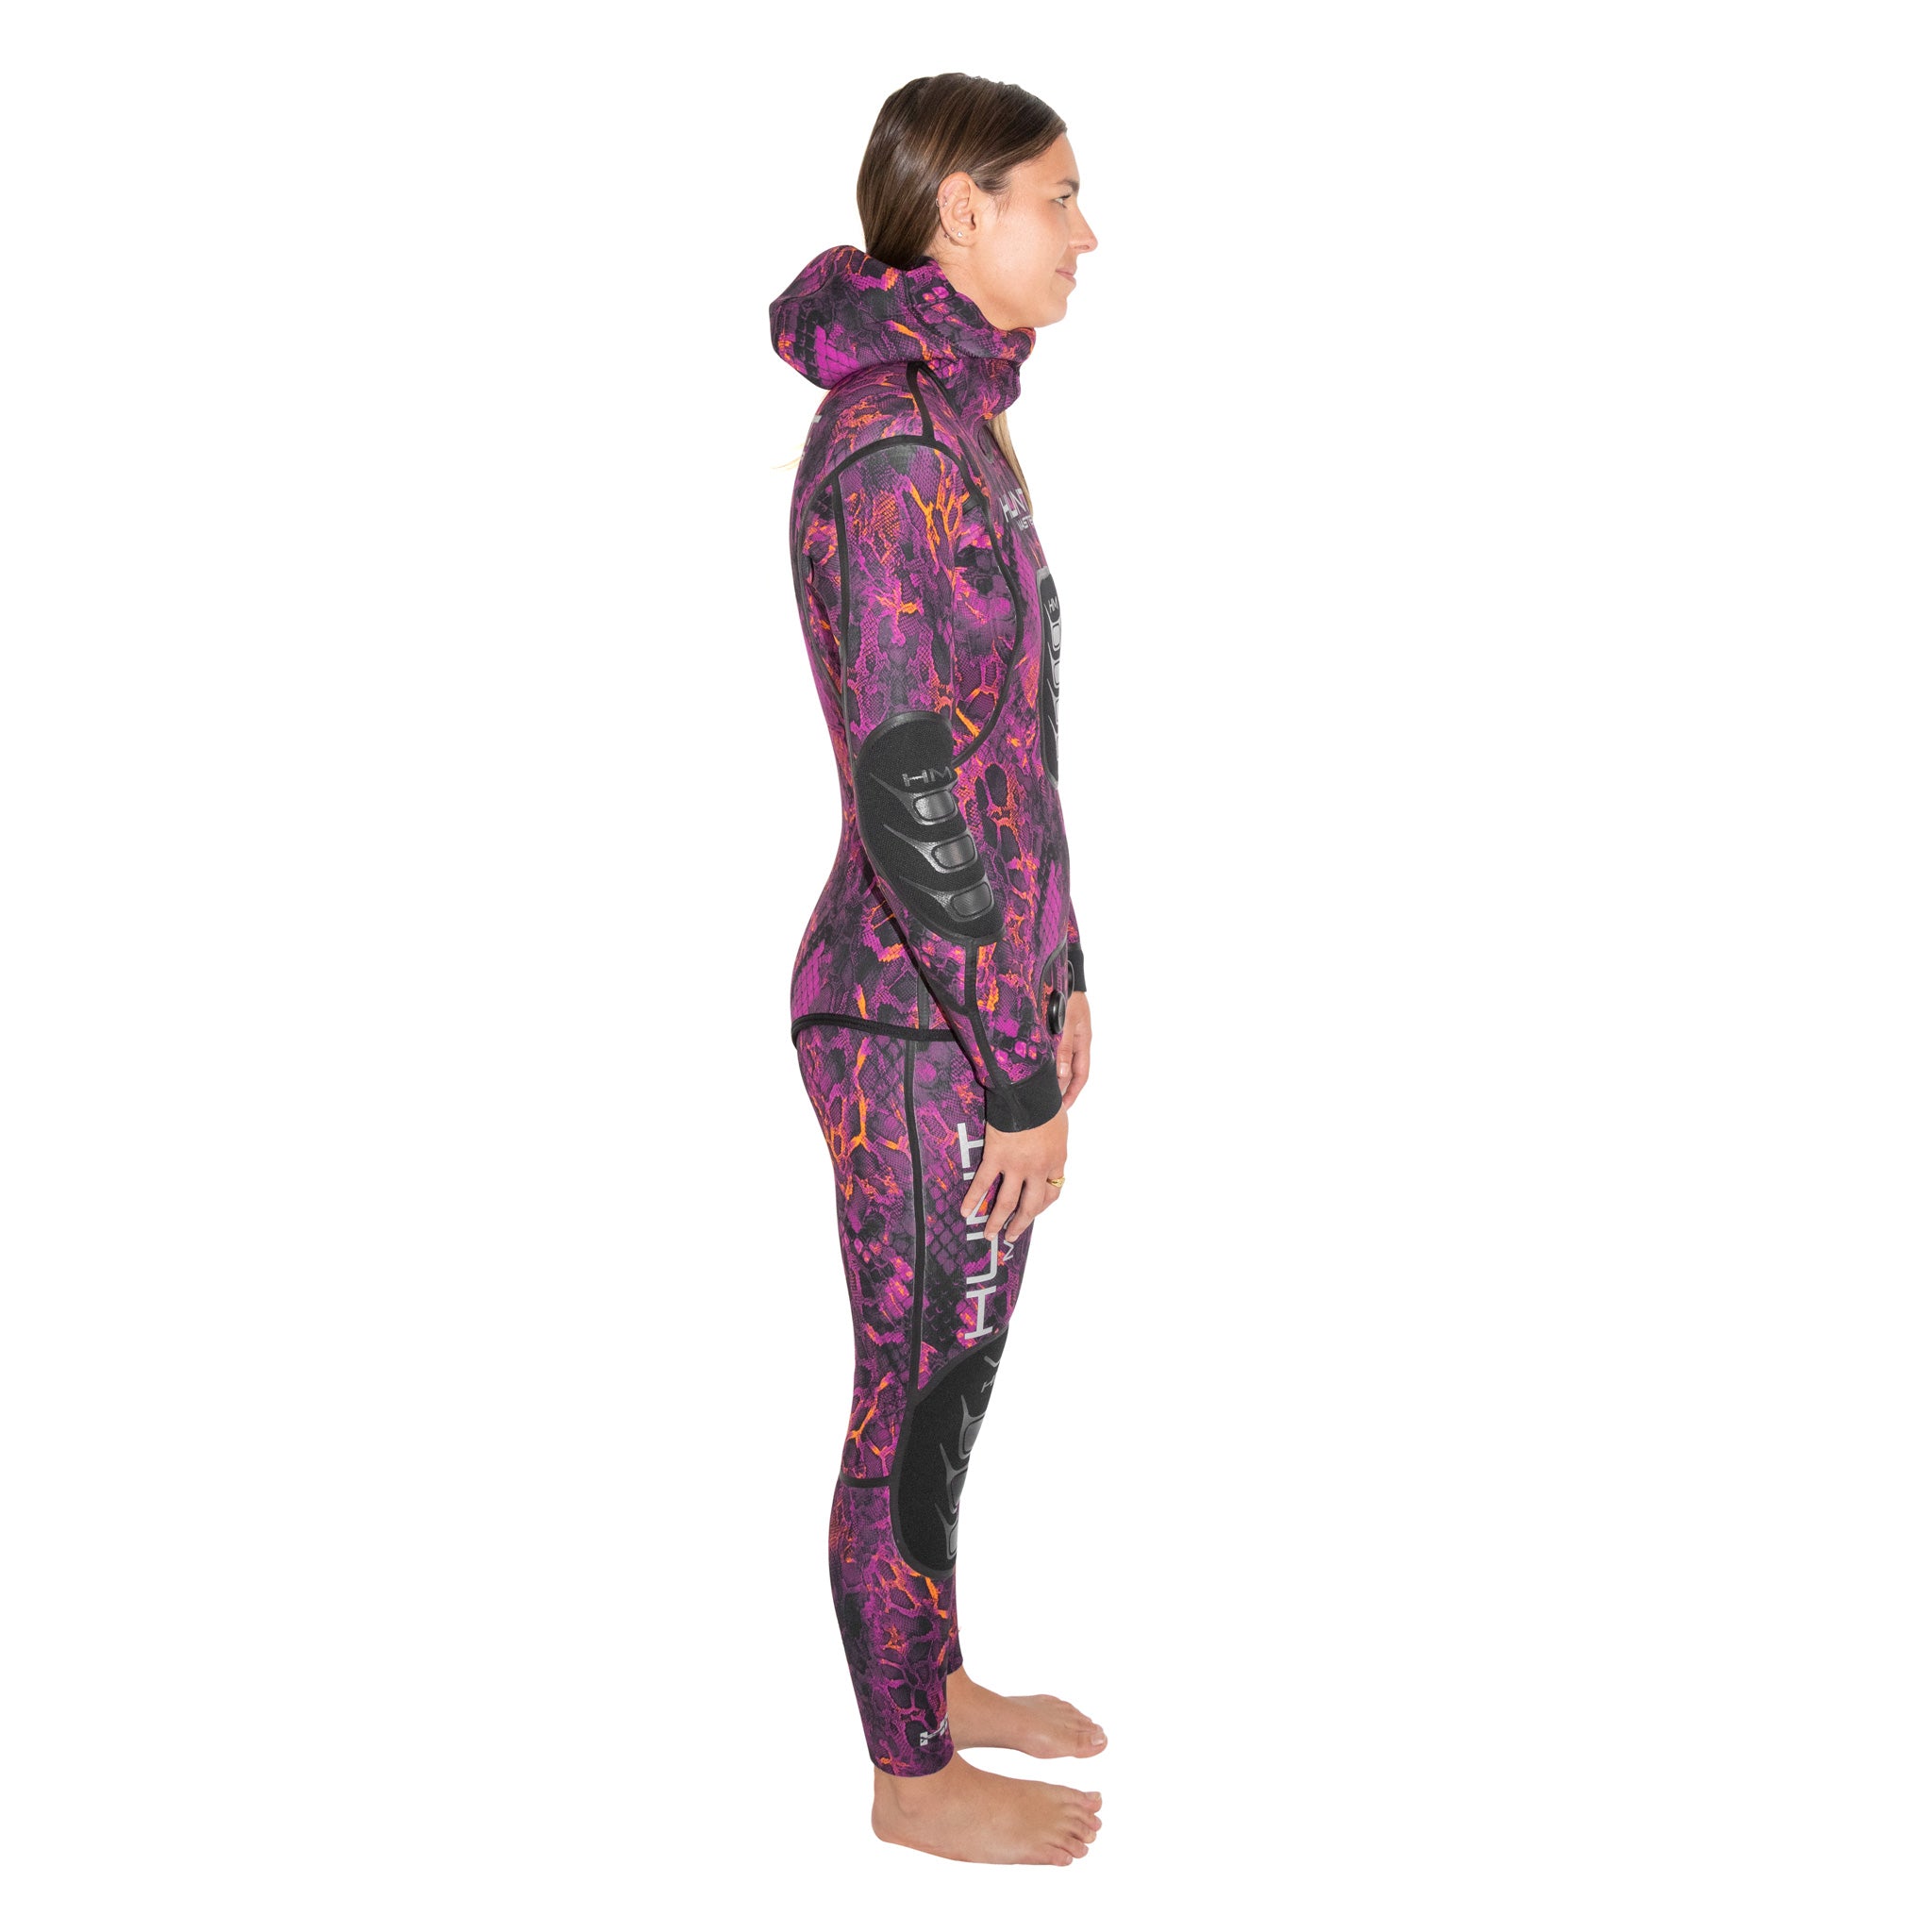  SPYKEY Wet Suit Fish Hunting Suit Split Diving Suit for Men and  Women Fishing and Hunting Semi-Dry Wetsuit (Color : Multi-Colored, Size :  3X-Large) : Sports & Outdoors